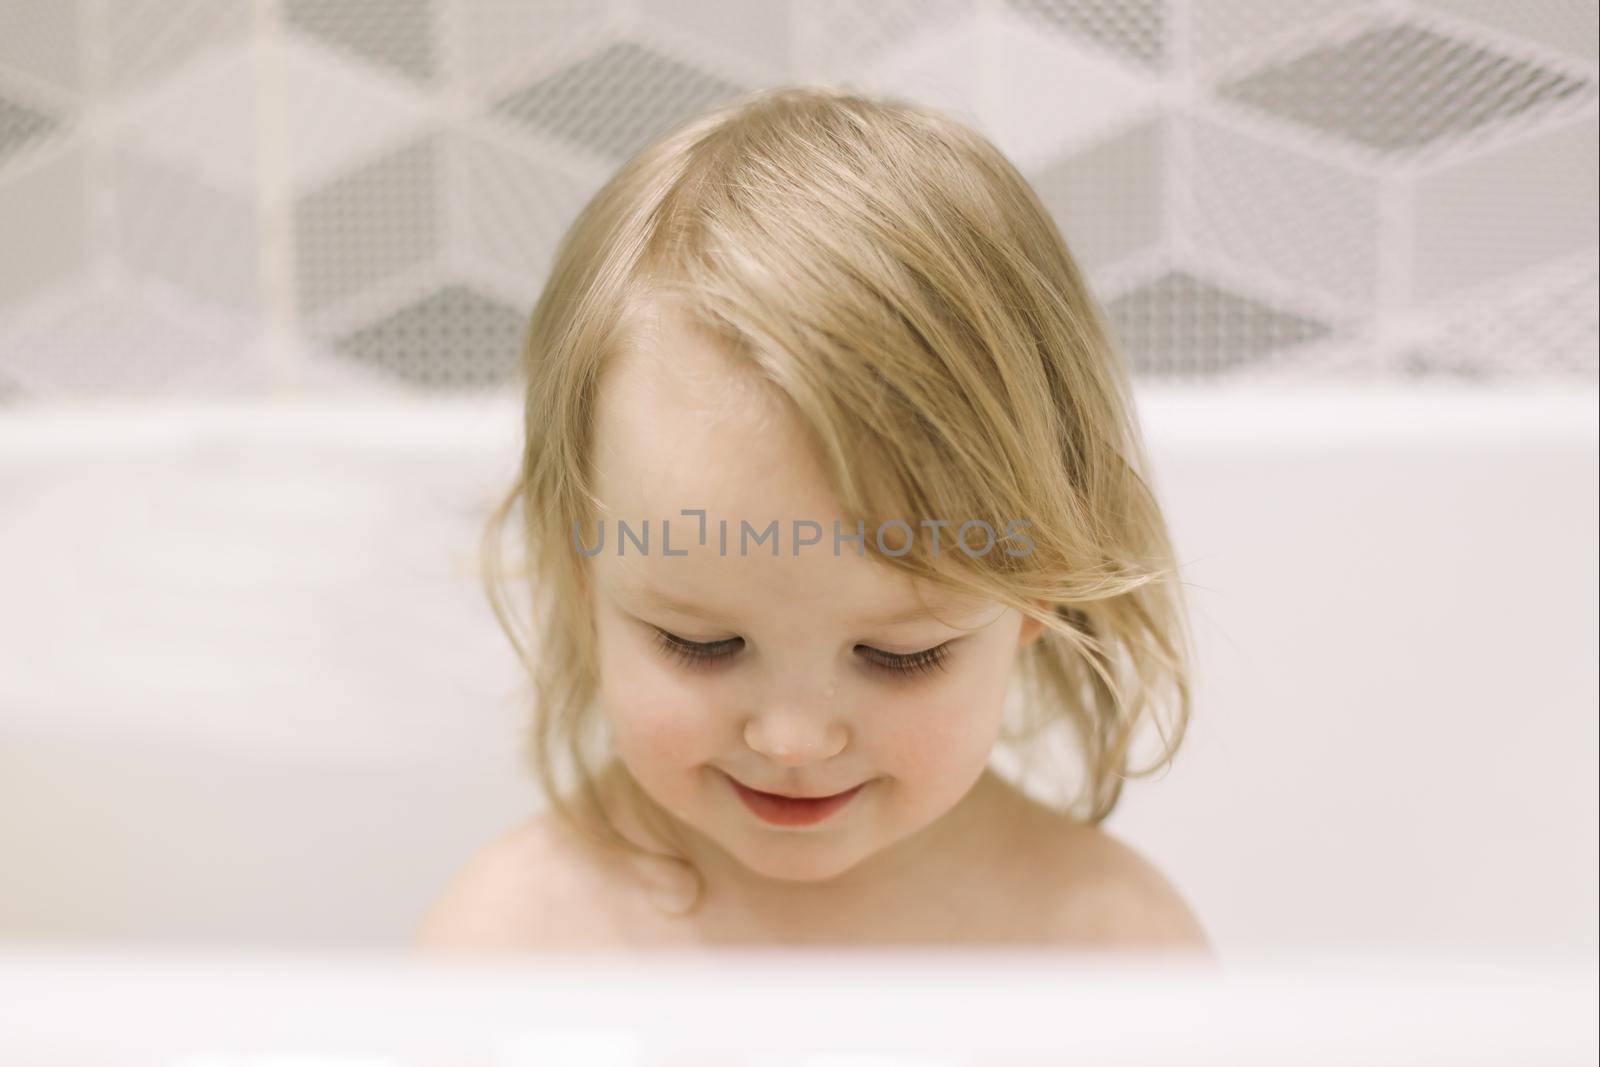 Child bathing. Little baby taking bath, closeup face portrait of smiling girl, health care and kids hygiene by paralisart